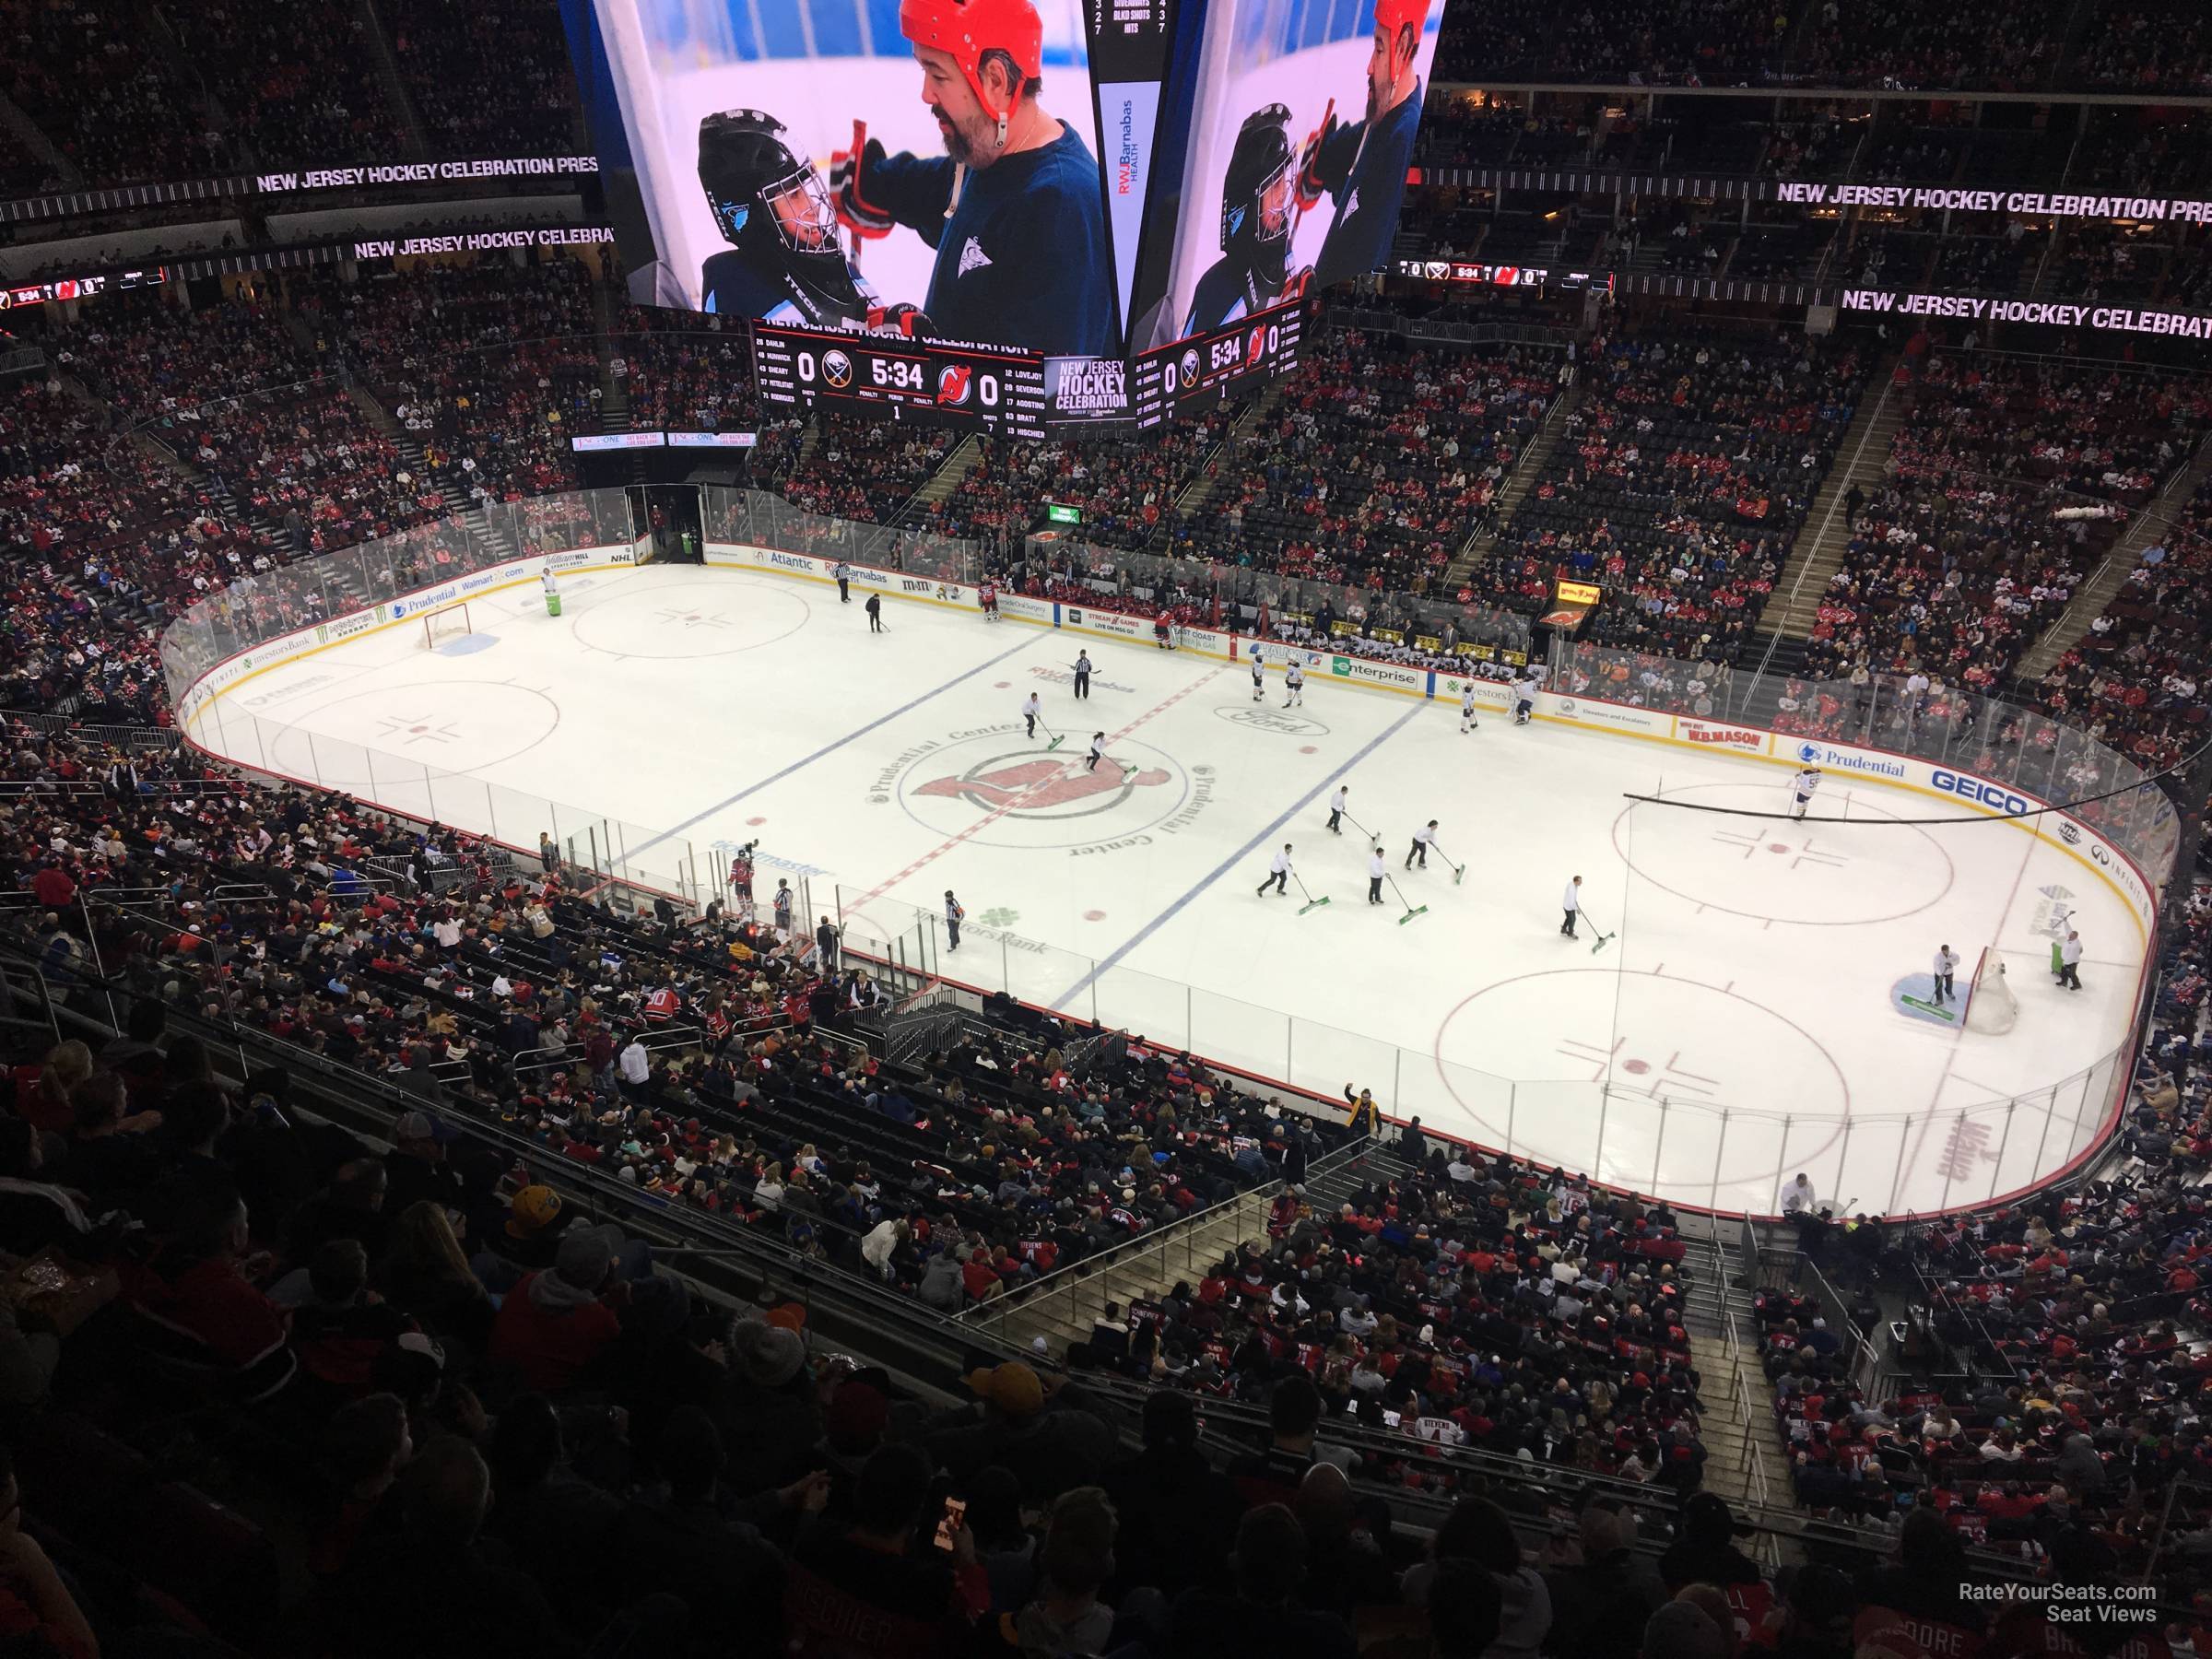 section 131, row 6 seat view  for hockey - prudential center